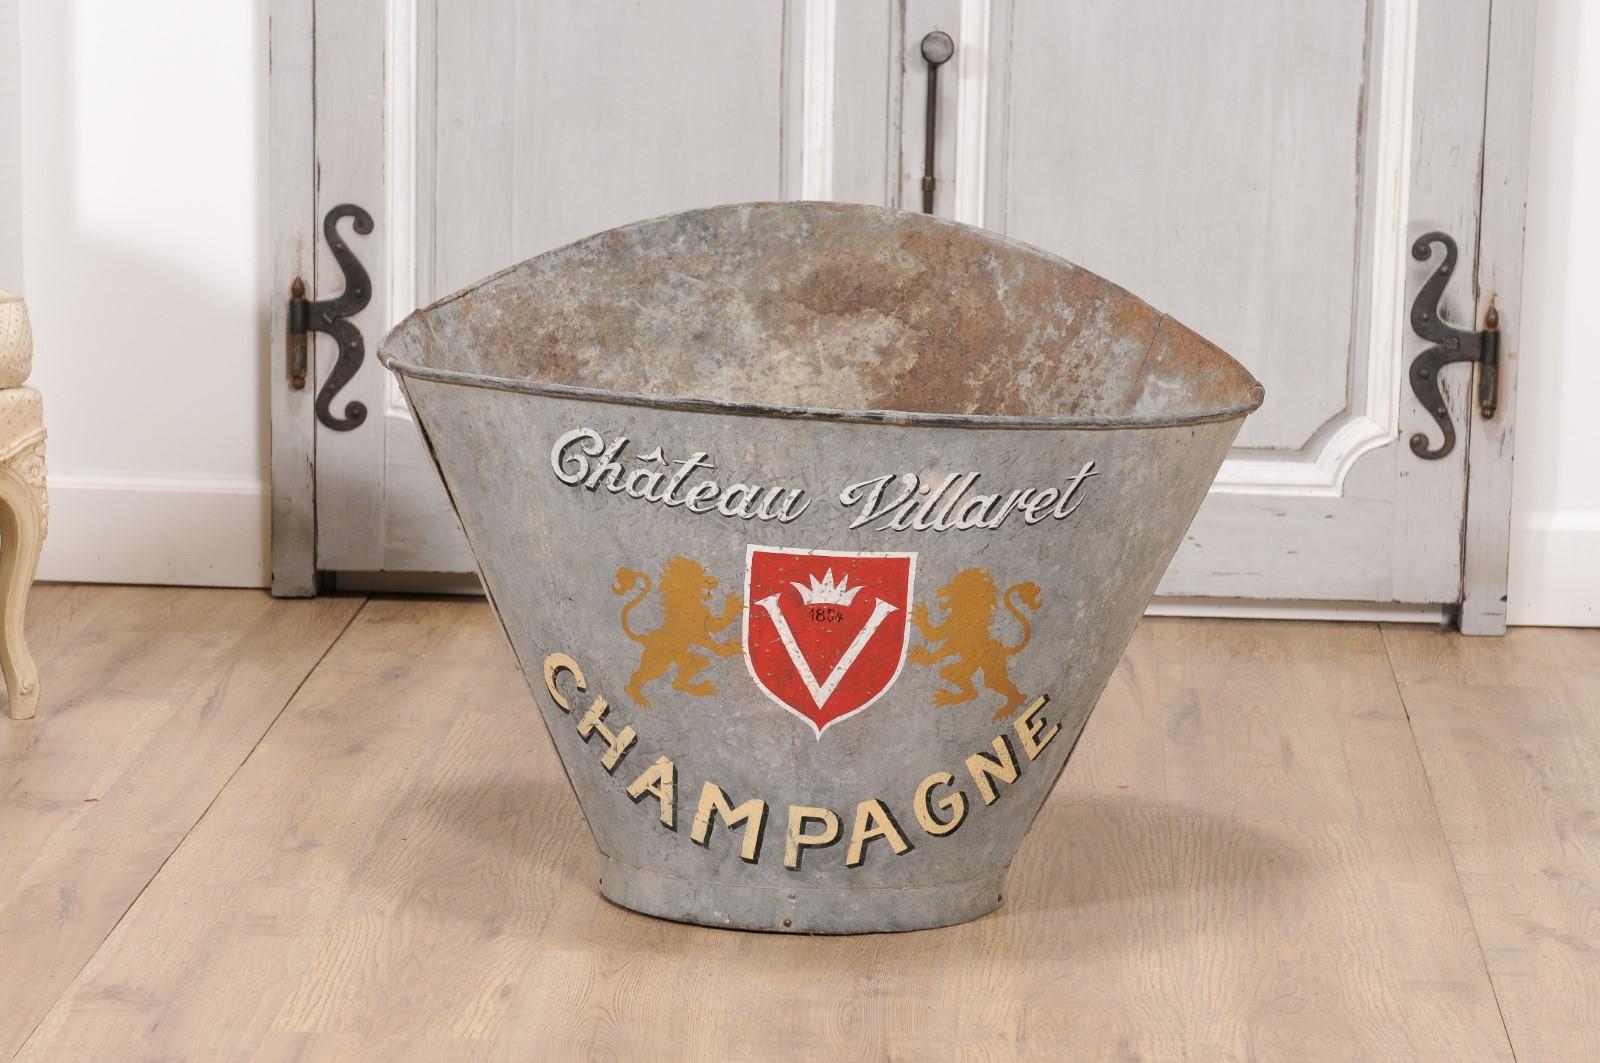 A French alumunium grape picking hod from circa 1890 with Château Villaret Champagne label. Immerse yourself in the historic charm of French winemaking with this vintage grape picking hod from the late 19th century. A tangible reminder of the